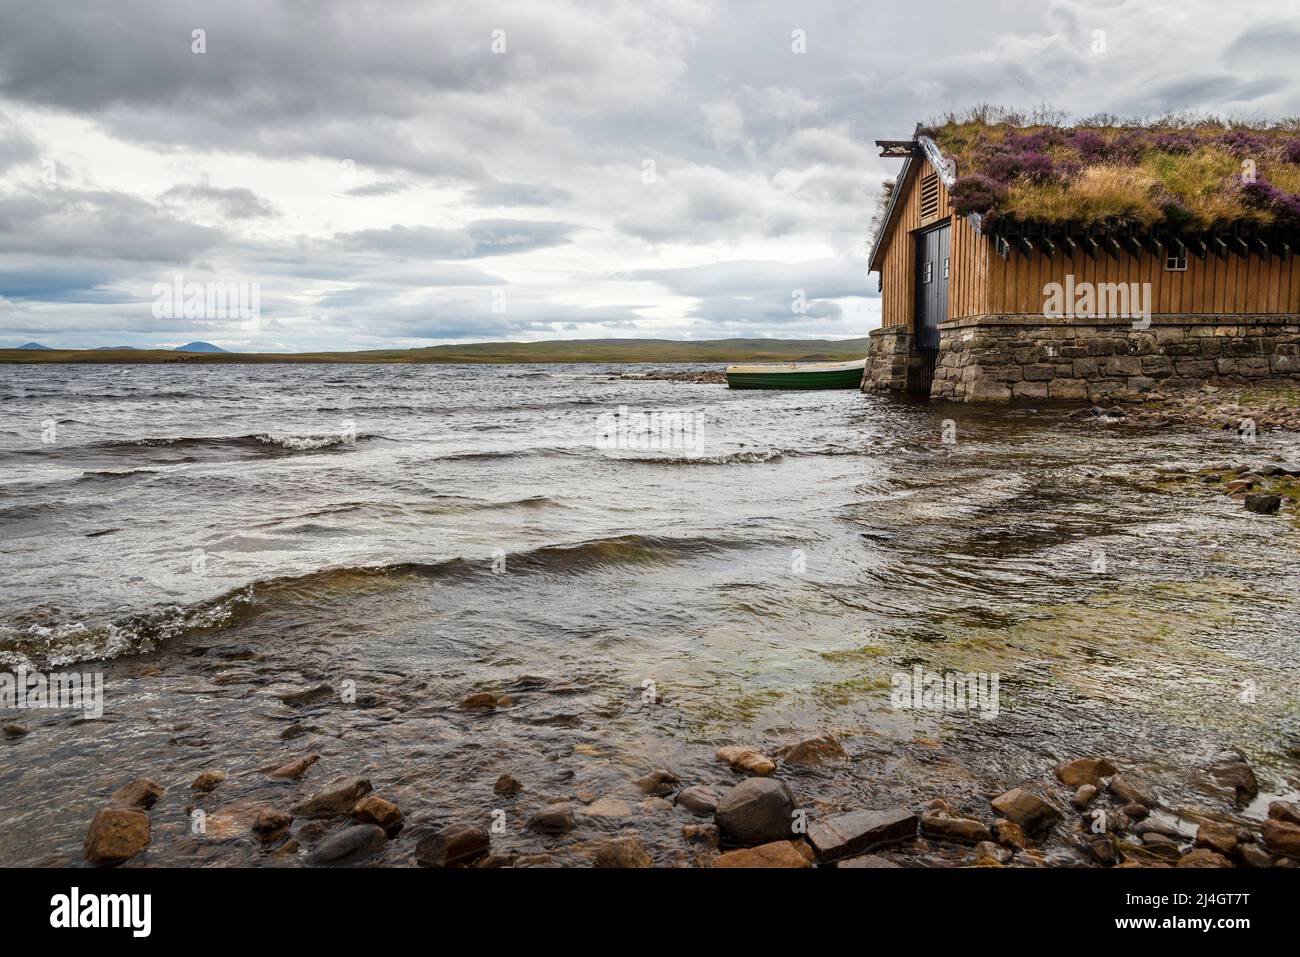 A wooden boathouse with a turf roof beside Loch Loyal on a cloudy day. Stock Photo